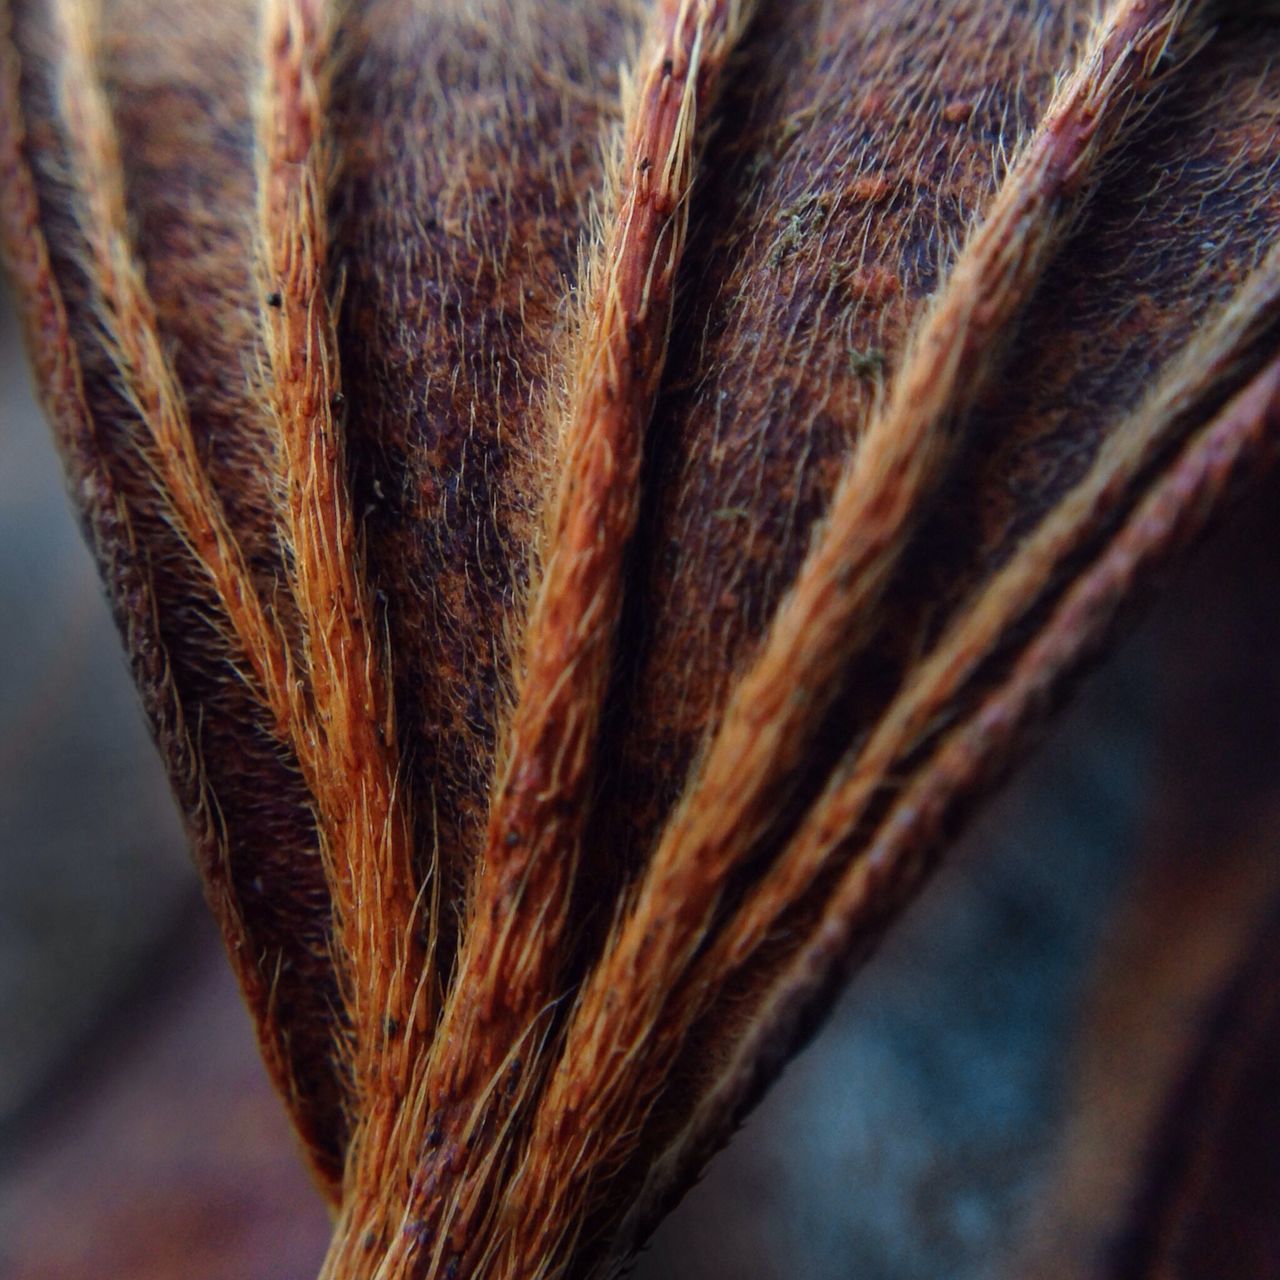 close-up, selective focus, focus on foreground, part of, detail, brown, rope, no people, day, outdoors, backgrounds, textured, pattern, cropped, full frame, extreme close up, nature, macro, textile